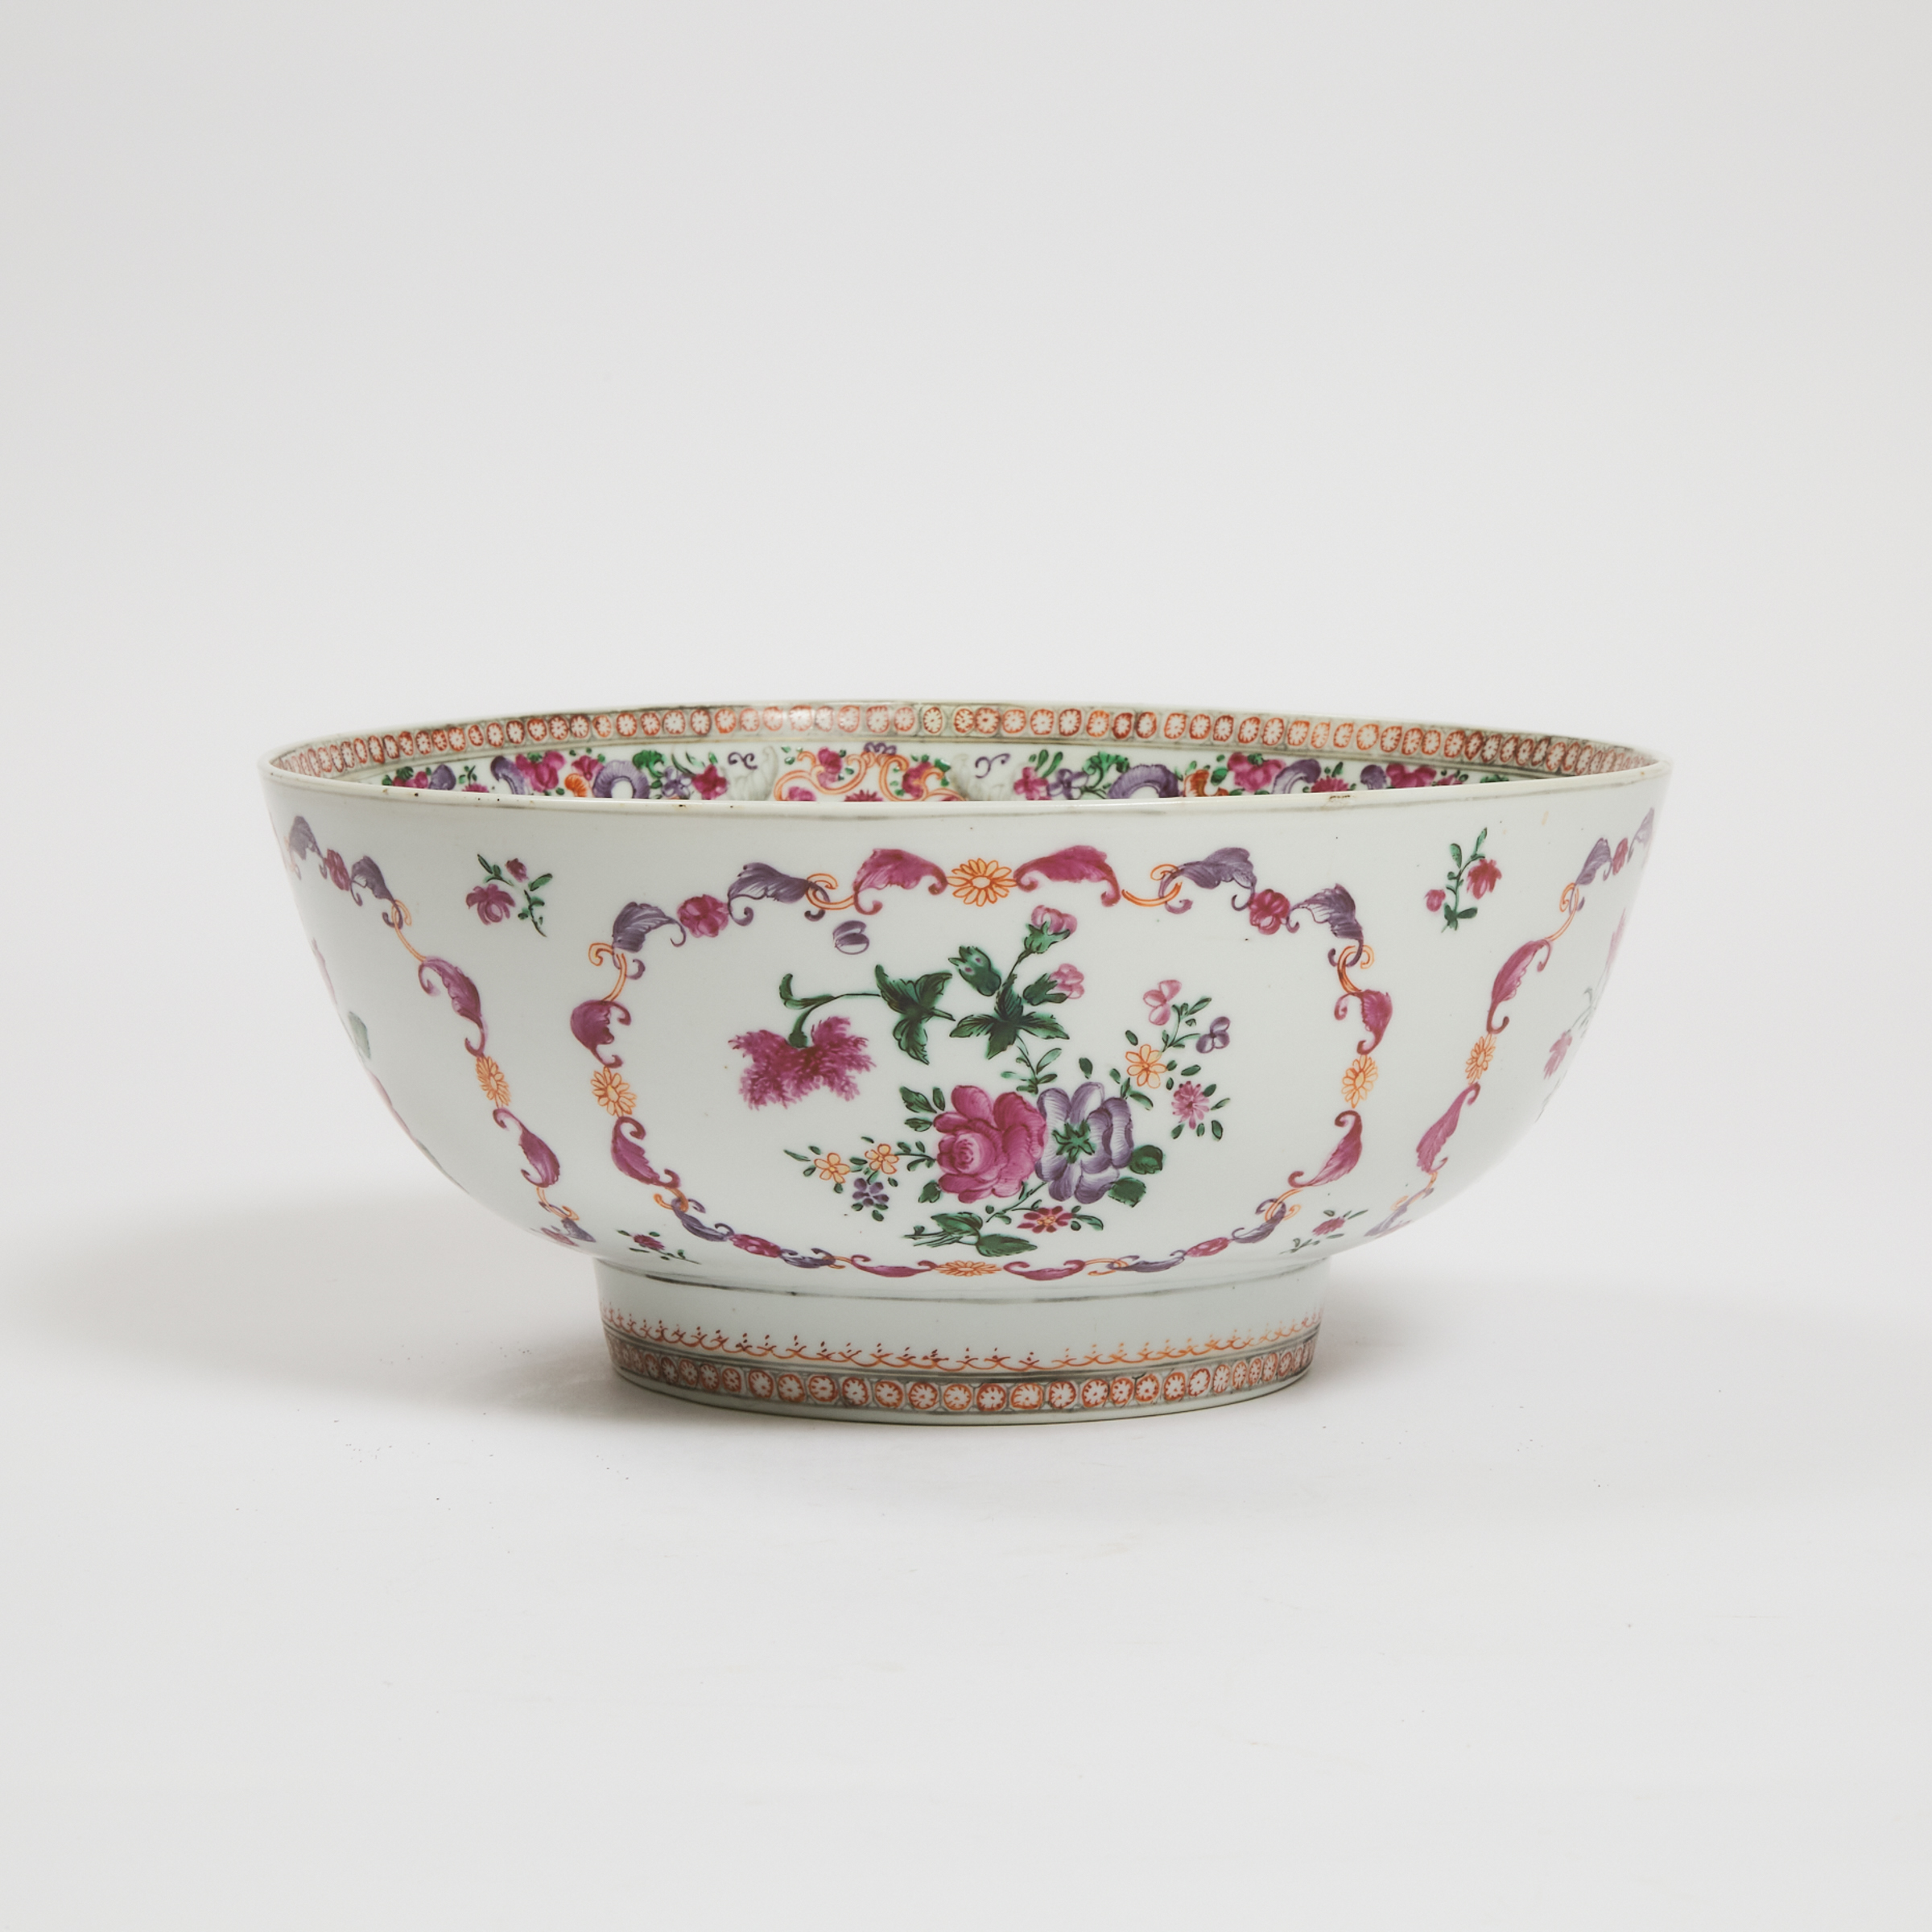 A Chinese Export Famille Rose Punch Bowl, Qianlong Period, 18th Century